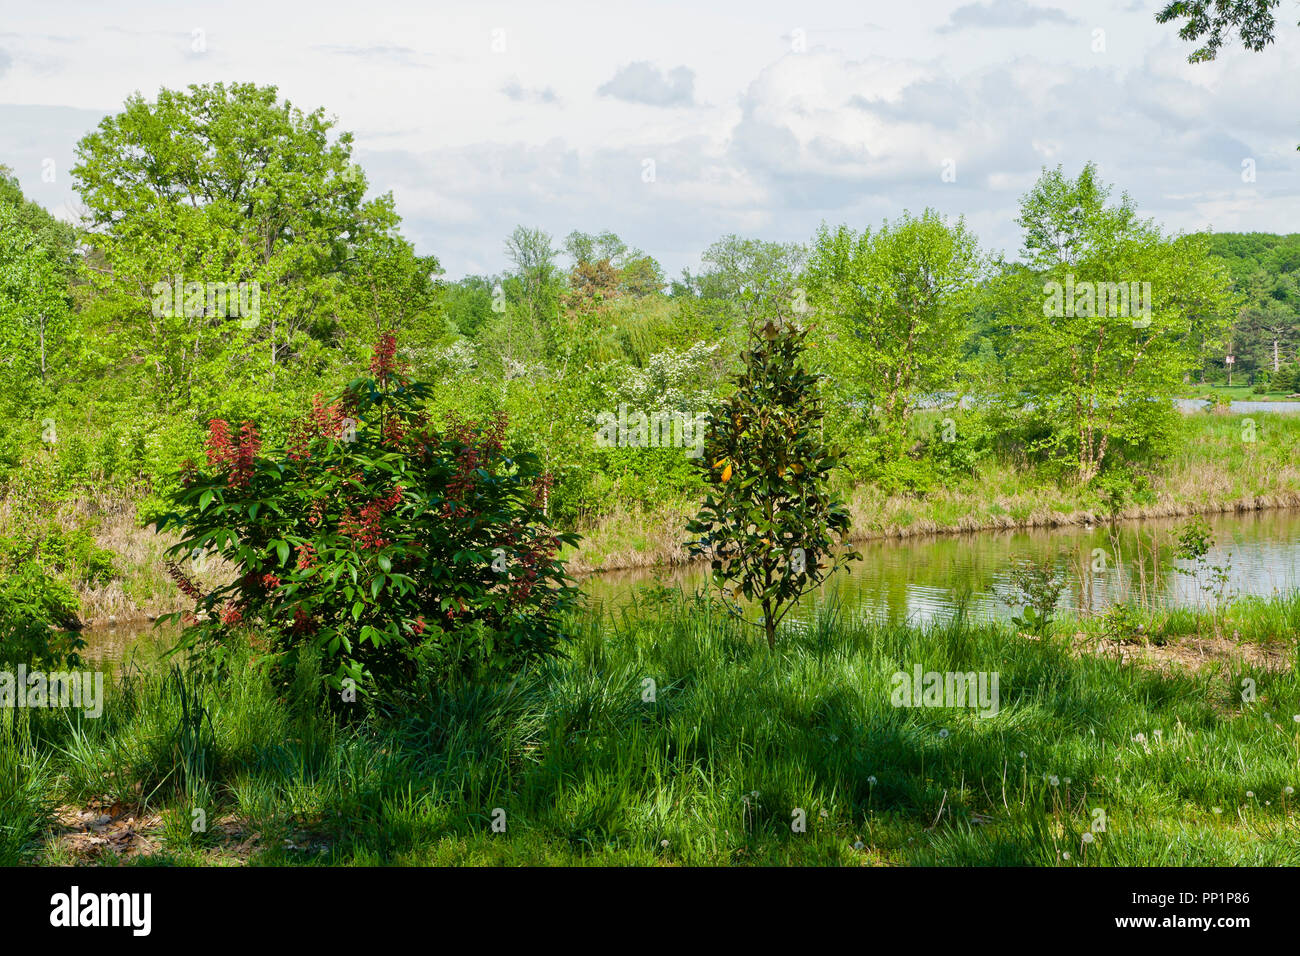 A red buckeye tree and a magnolia tree beside a stream at St. Louis Forest Park in spring. Stock Photo